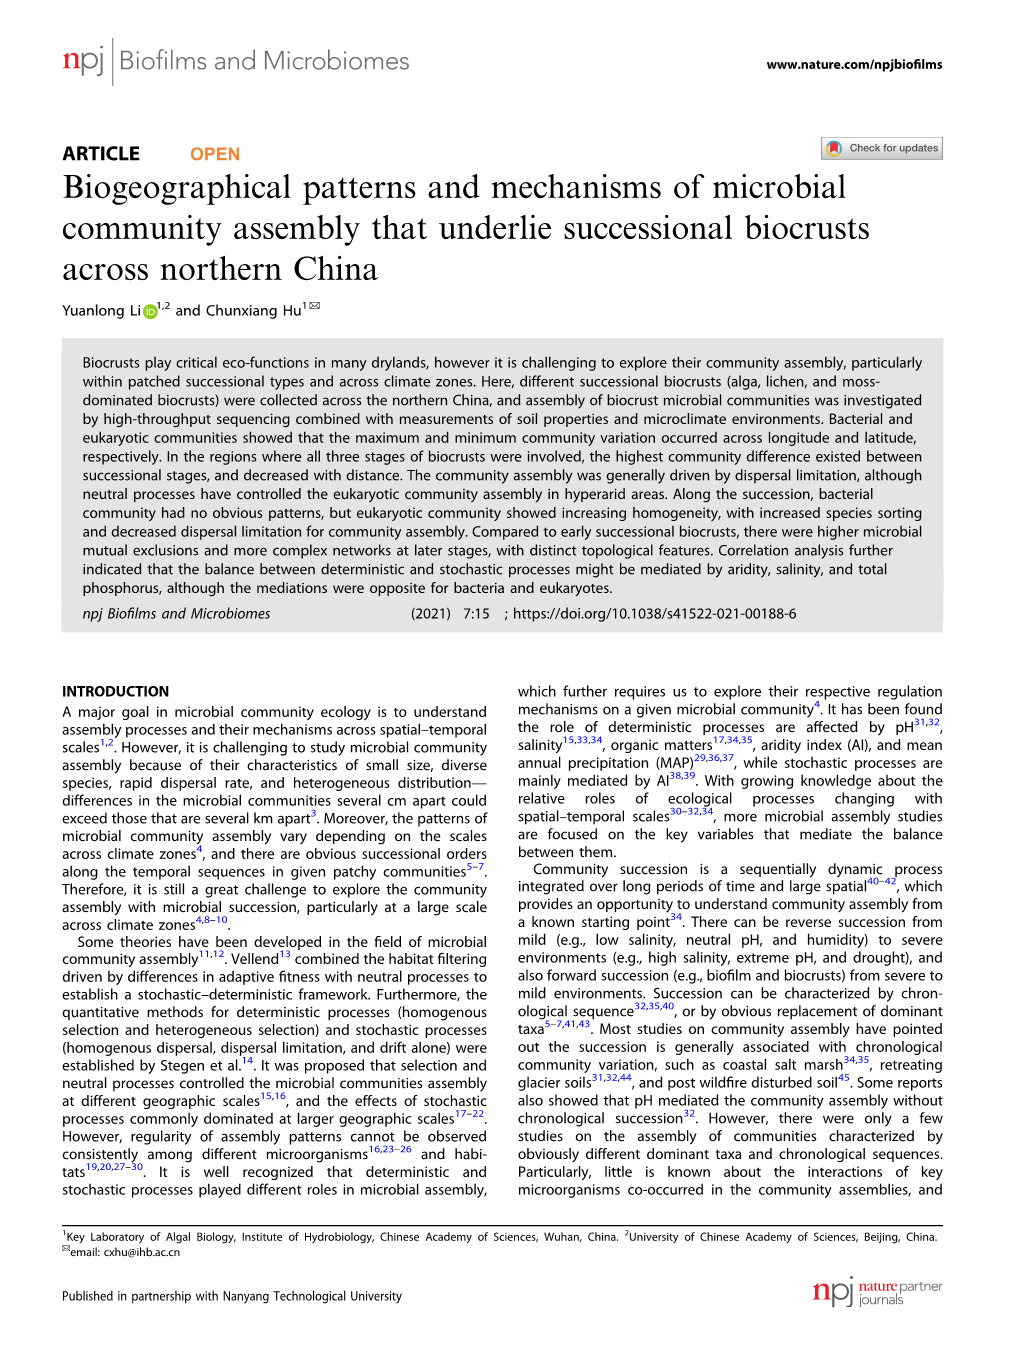 Biogeographical Patterns and Mechanisms of Microbial Community Assembly That Underlie Successional Biocrusts Across Northern China ✉ Yuanlong Li 1,2 and Chunxiang Hu1